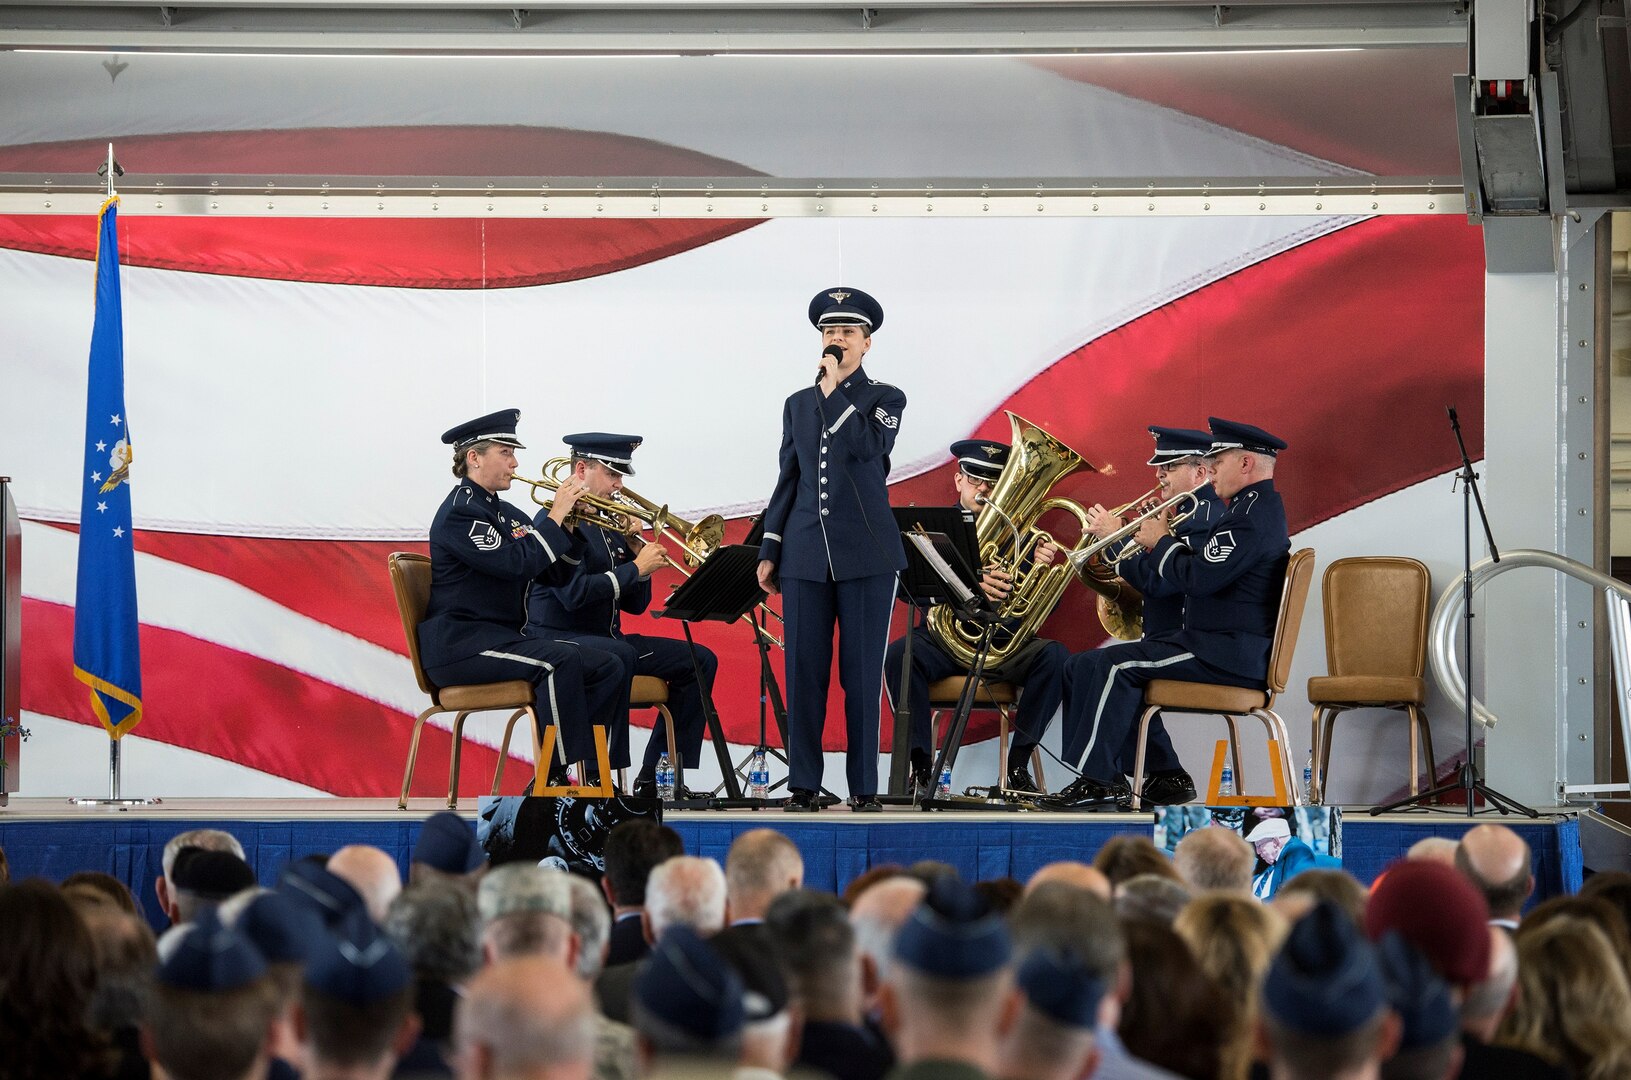 U.S. Air Force Staff Sgt. Michelle Doolittle, a descendant of Gen. Jimmy Doolittle, sings “America the Beautiful” during a memorial service celebrating the life of retired U.S. Air Force Lt. Col. Richard “Dick” E. Cole at Joint Base San Antonio-Randolph April 18. Cole, the last surviving Doolittle Raider, was the co-pilot on a B-25 Mitchell for then-Col. Jimmy Doolittle during the storied World War II Doolittle Tokyo Raid.